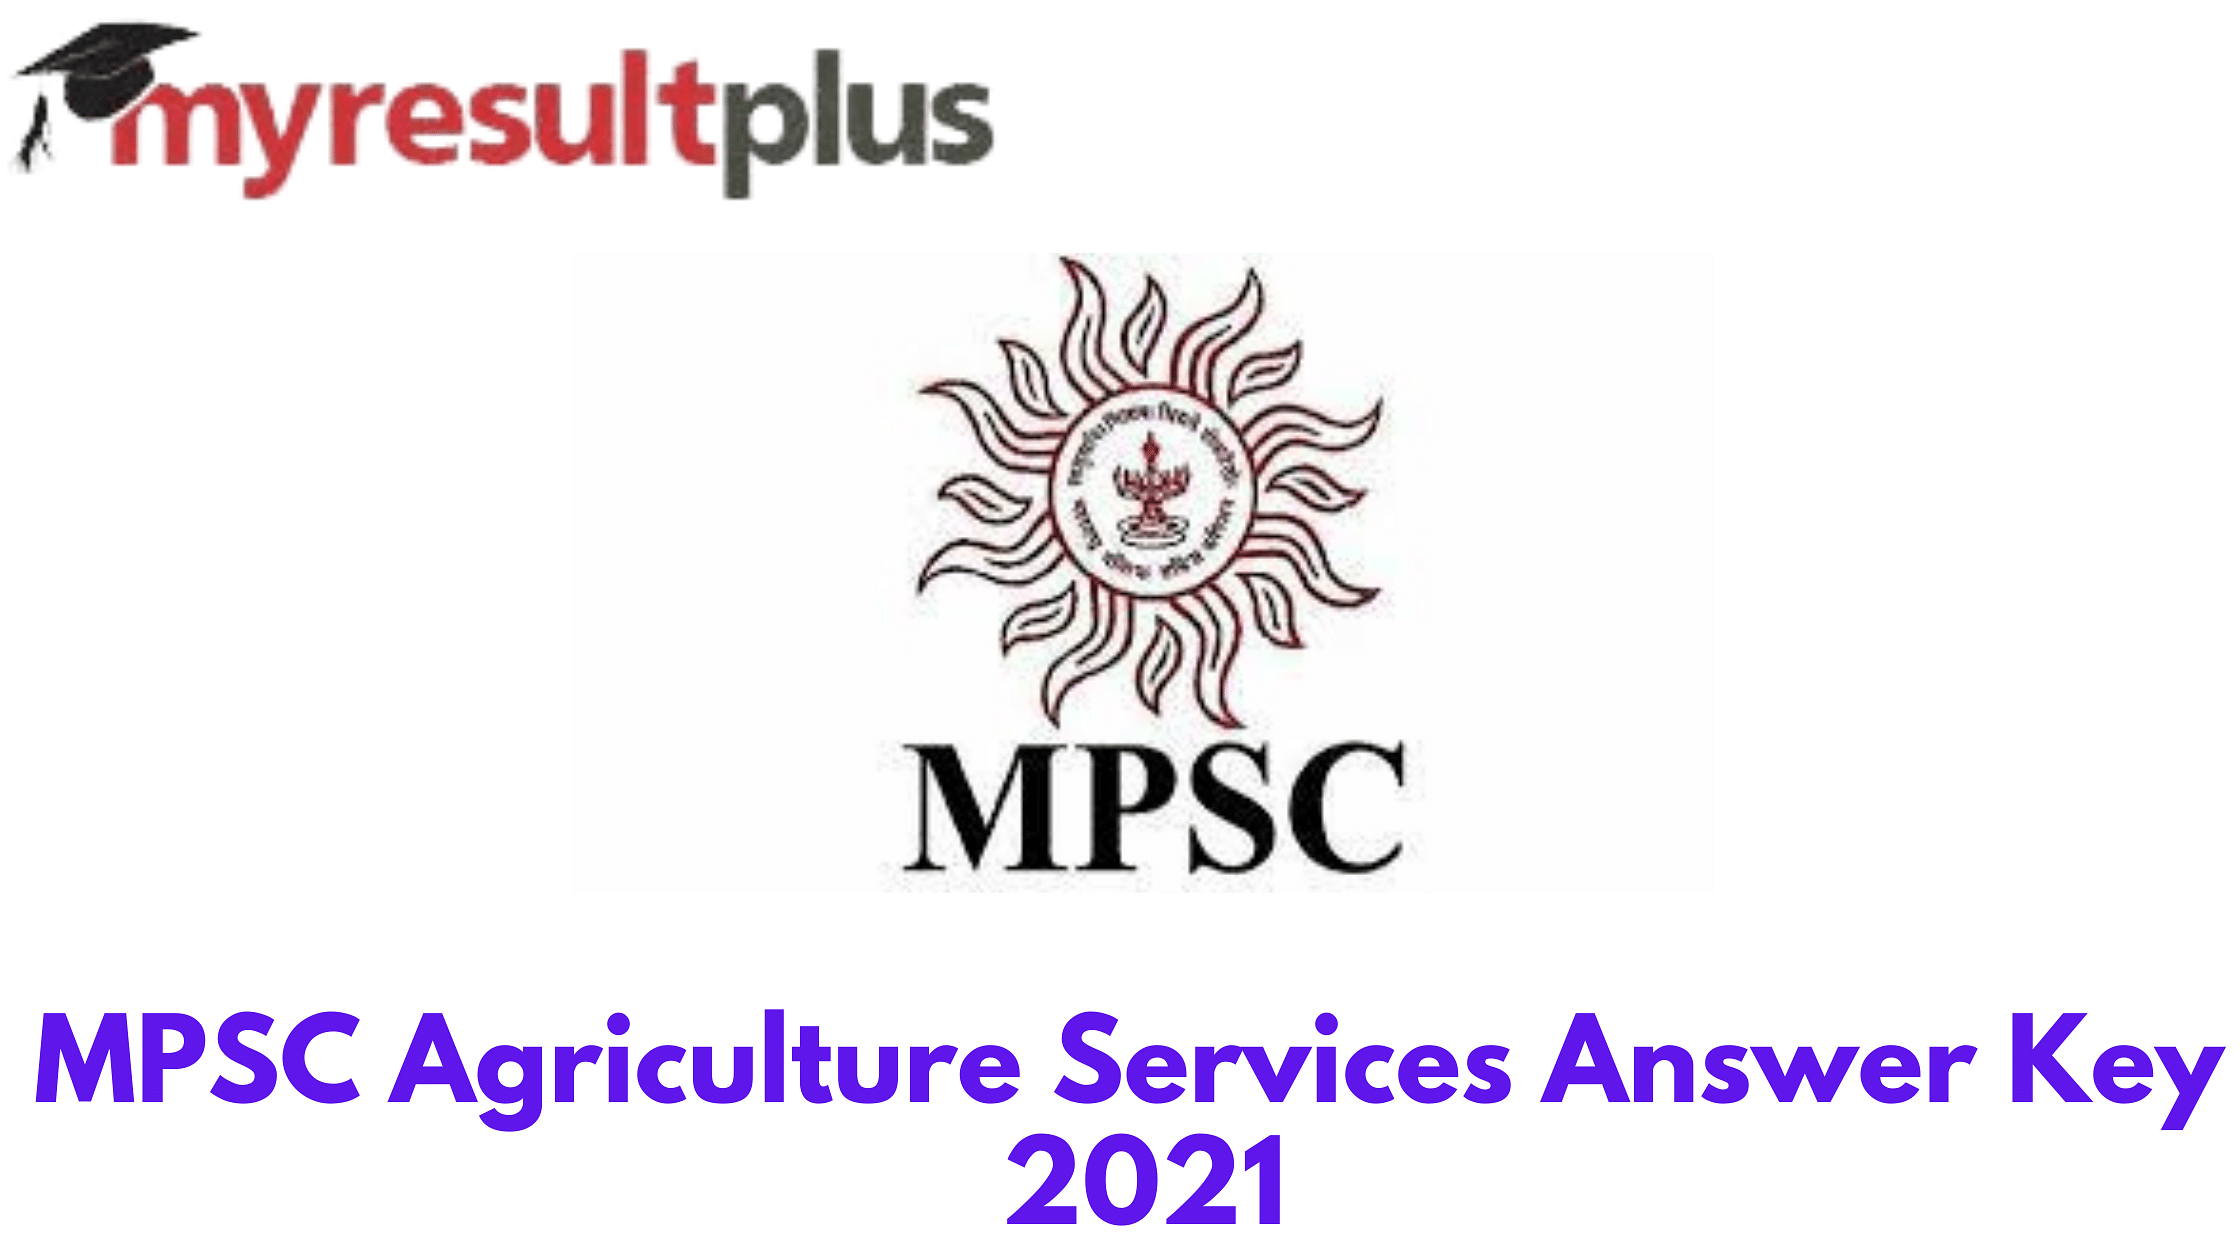 MPSC Agriculture Services Answer Key 2021 Out For Mains, Direct Link to Check Here